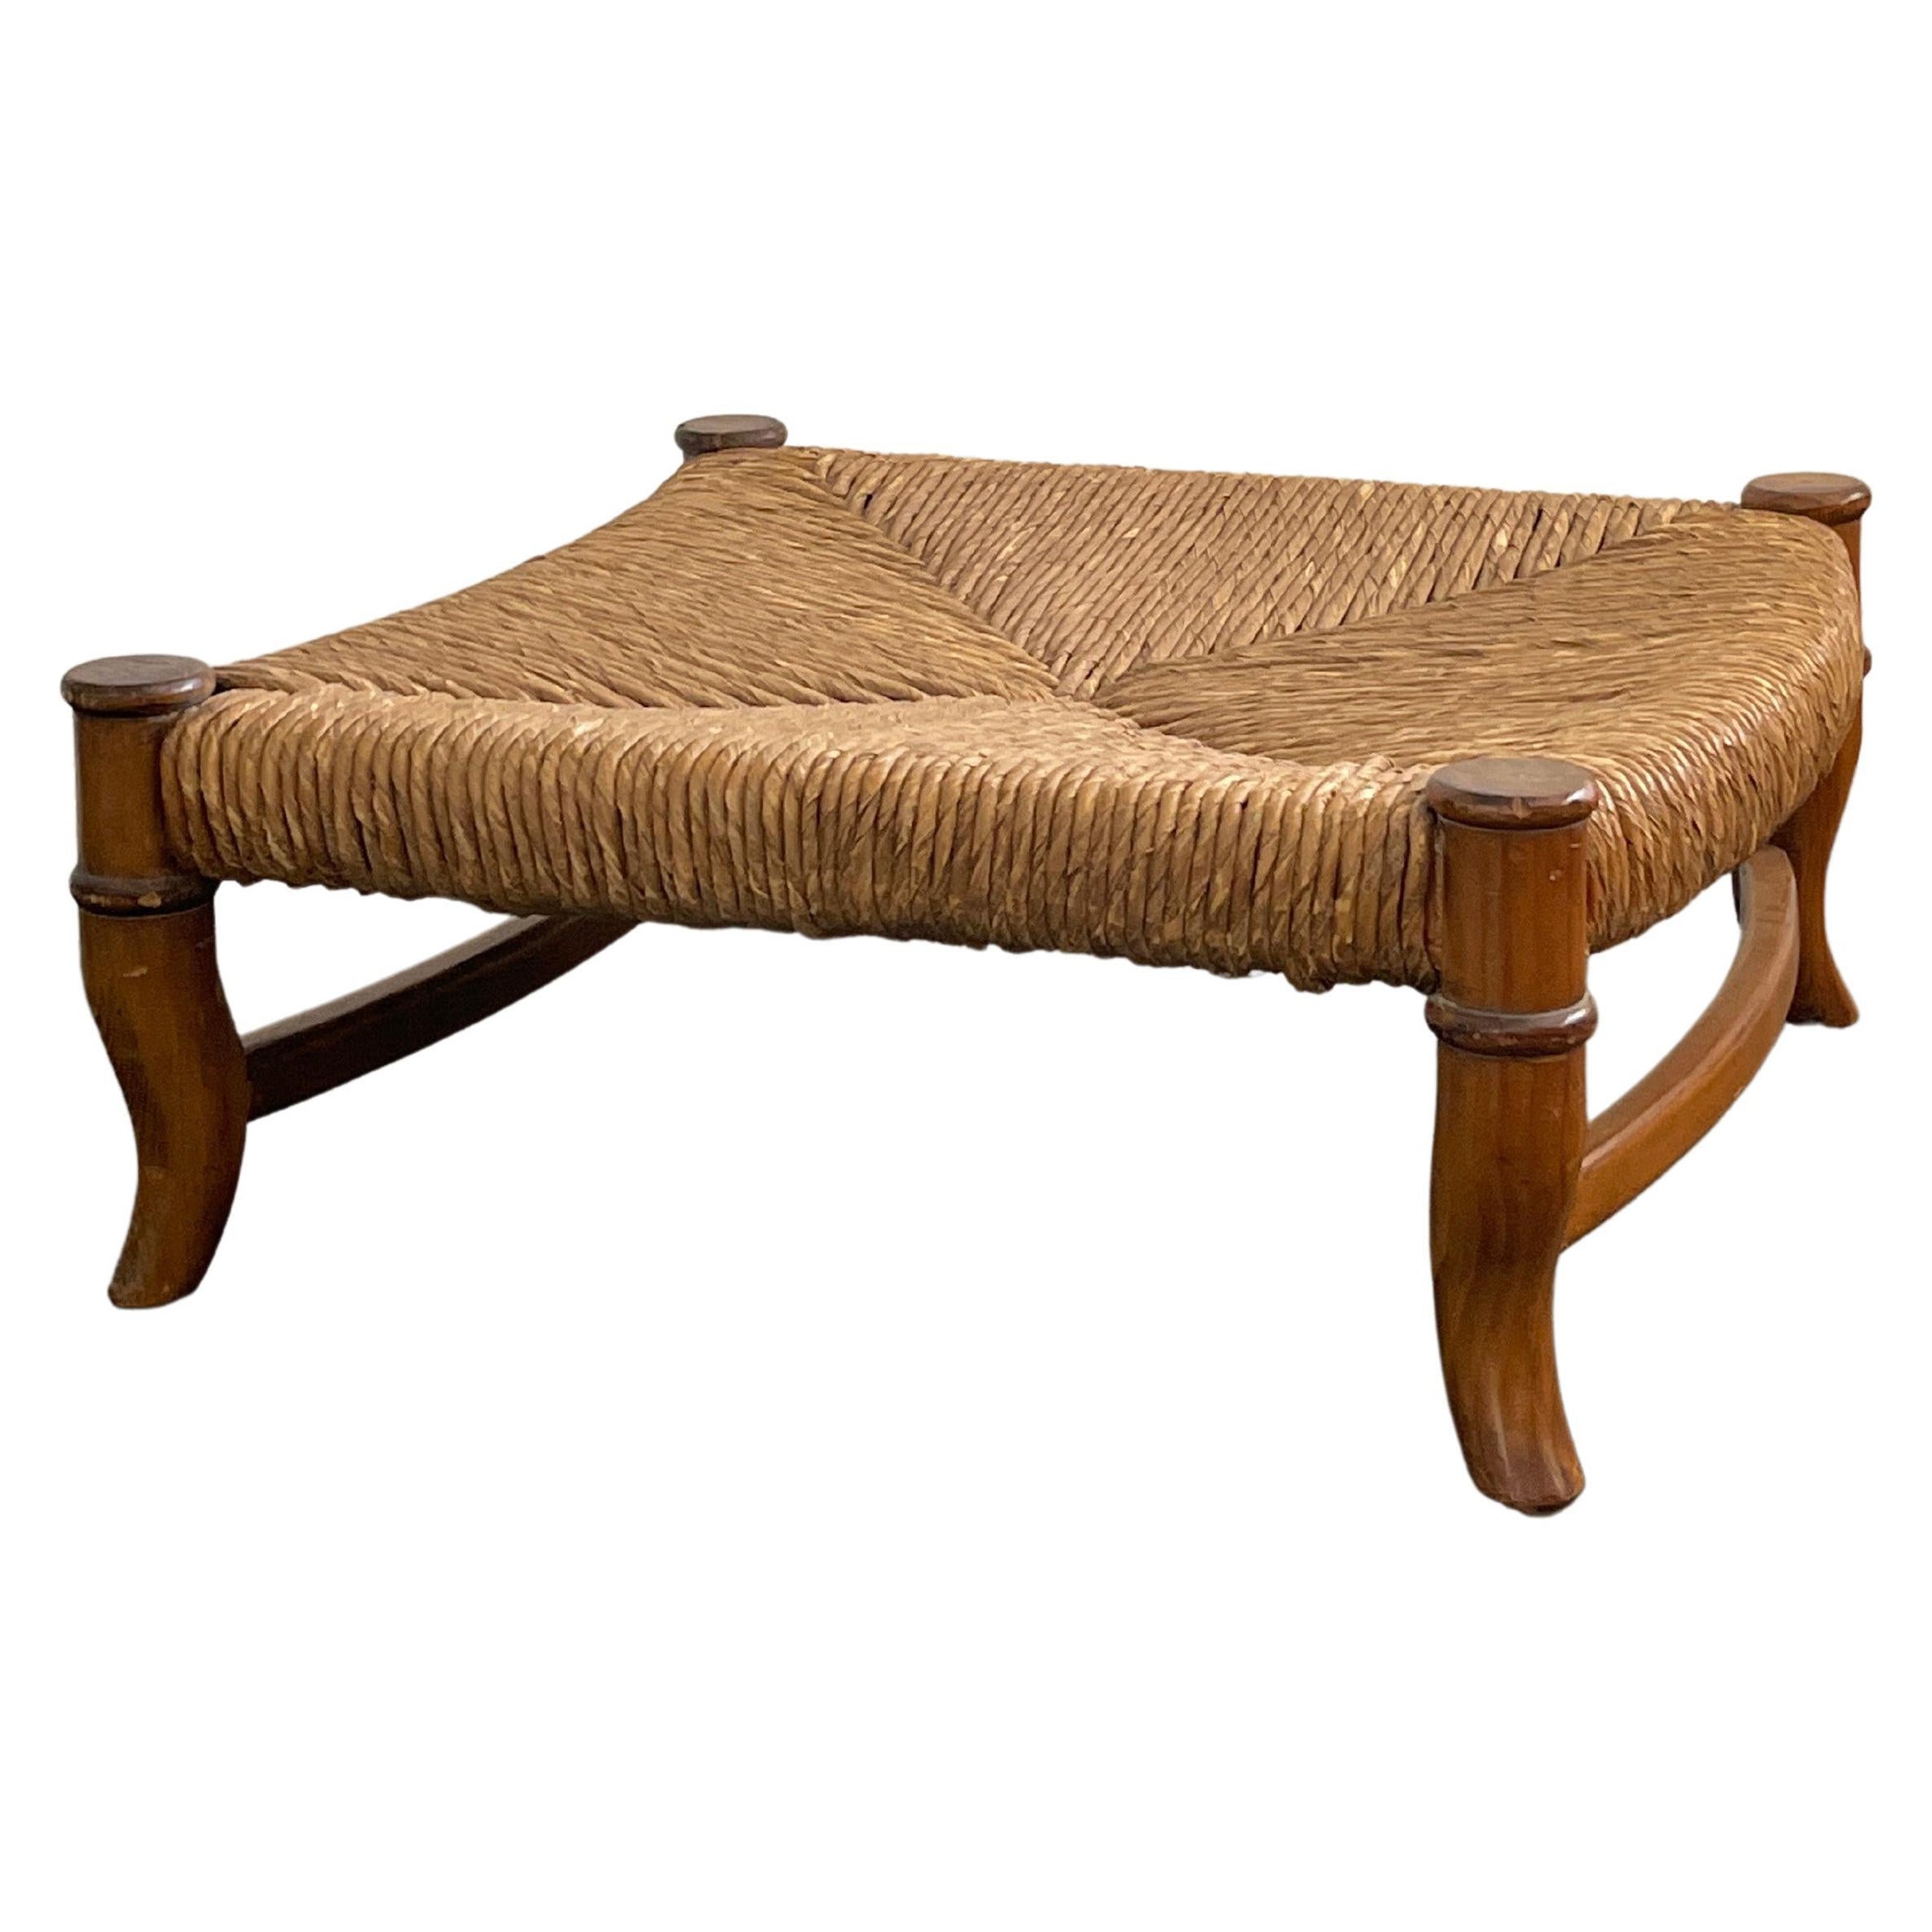 20th Century Hand Woven Wicker and Wood Ottoman For Sale